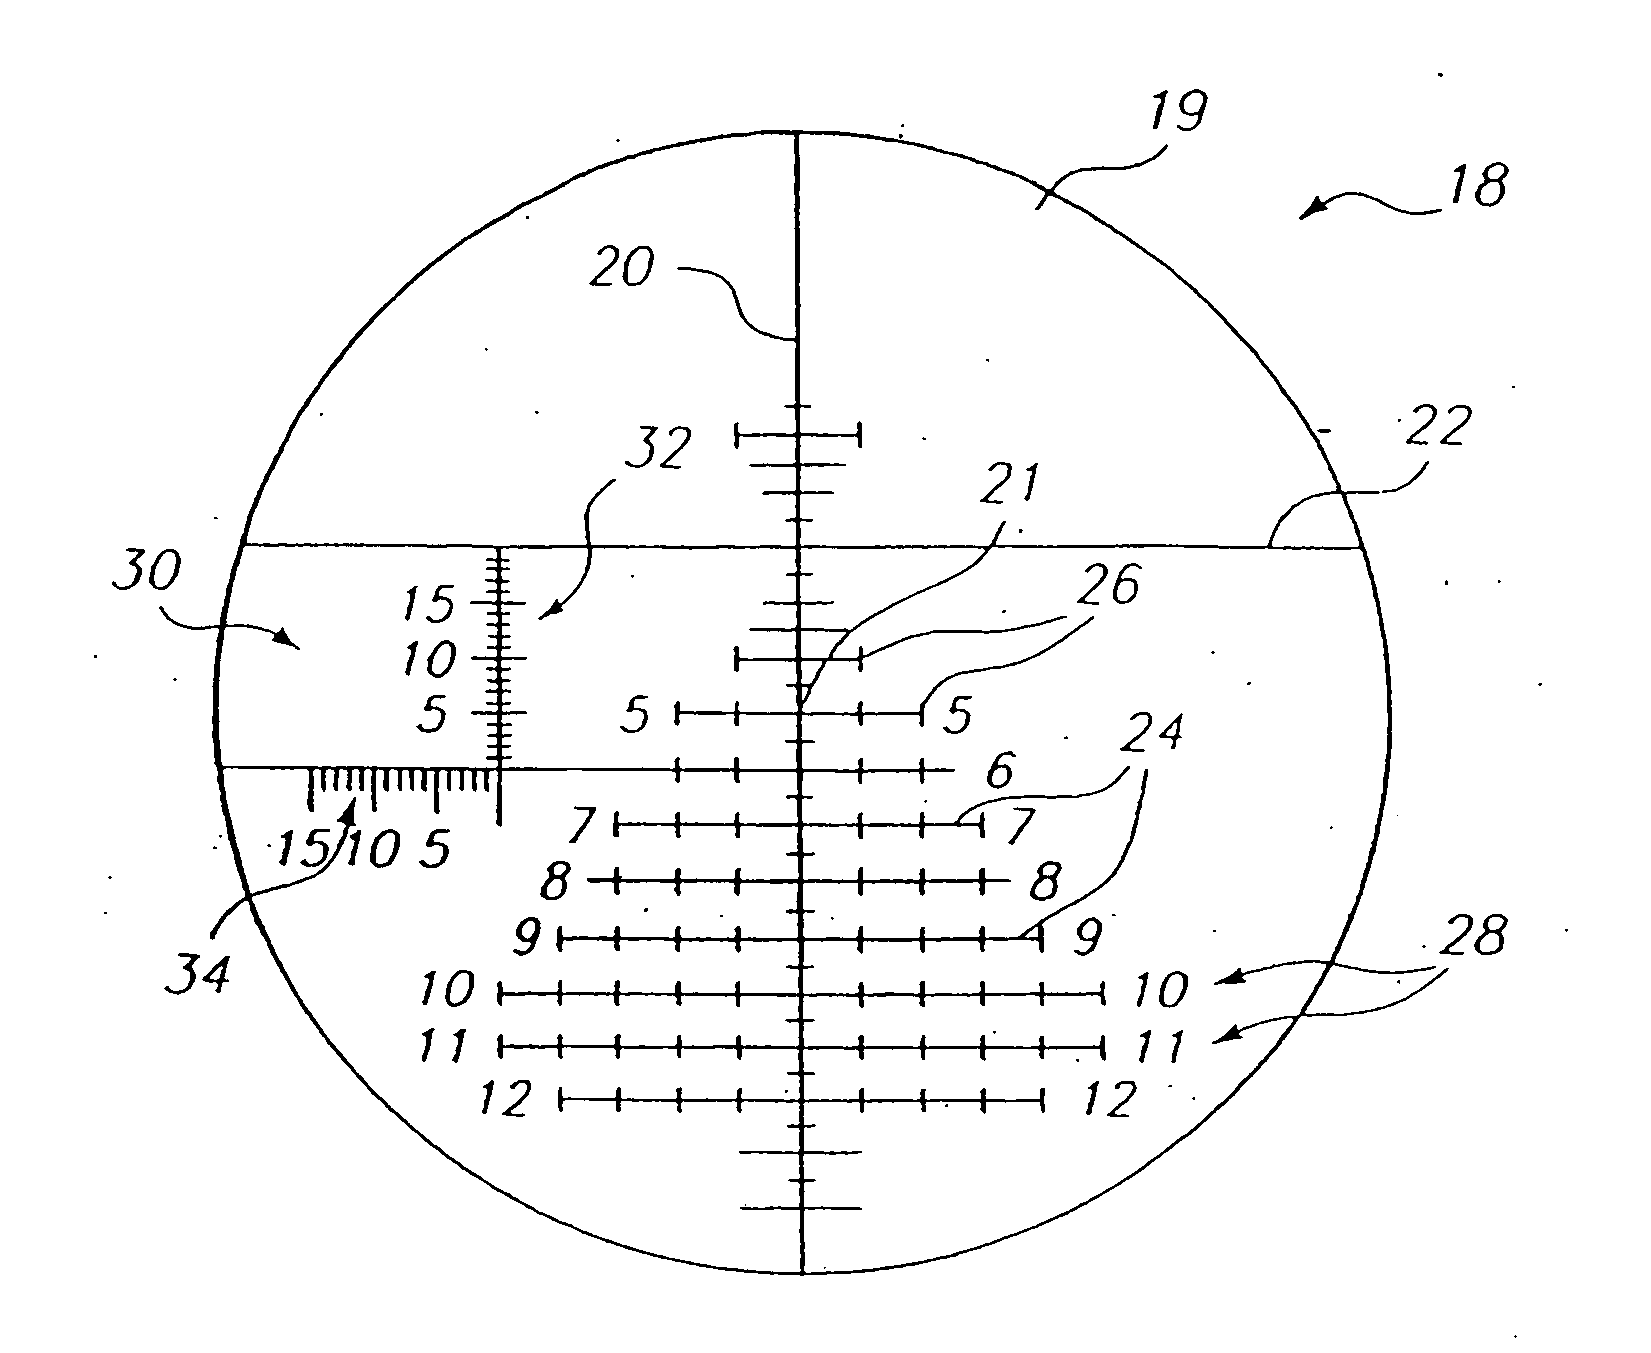 Apparatus and method for calculating aiming point information